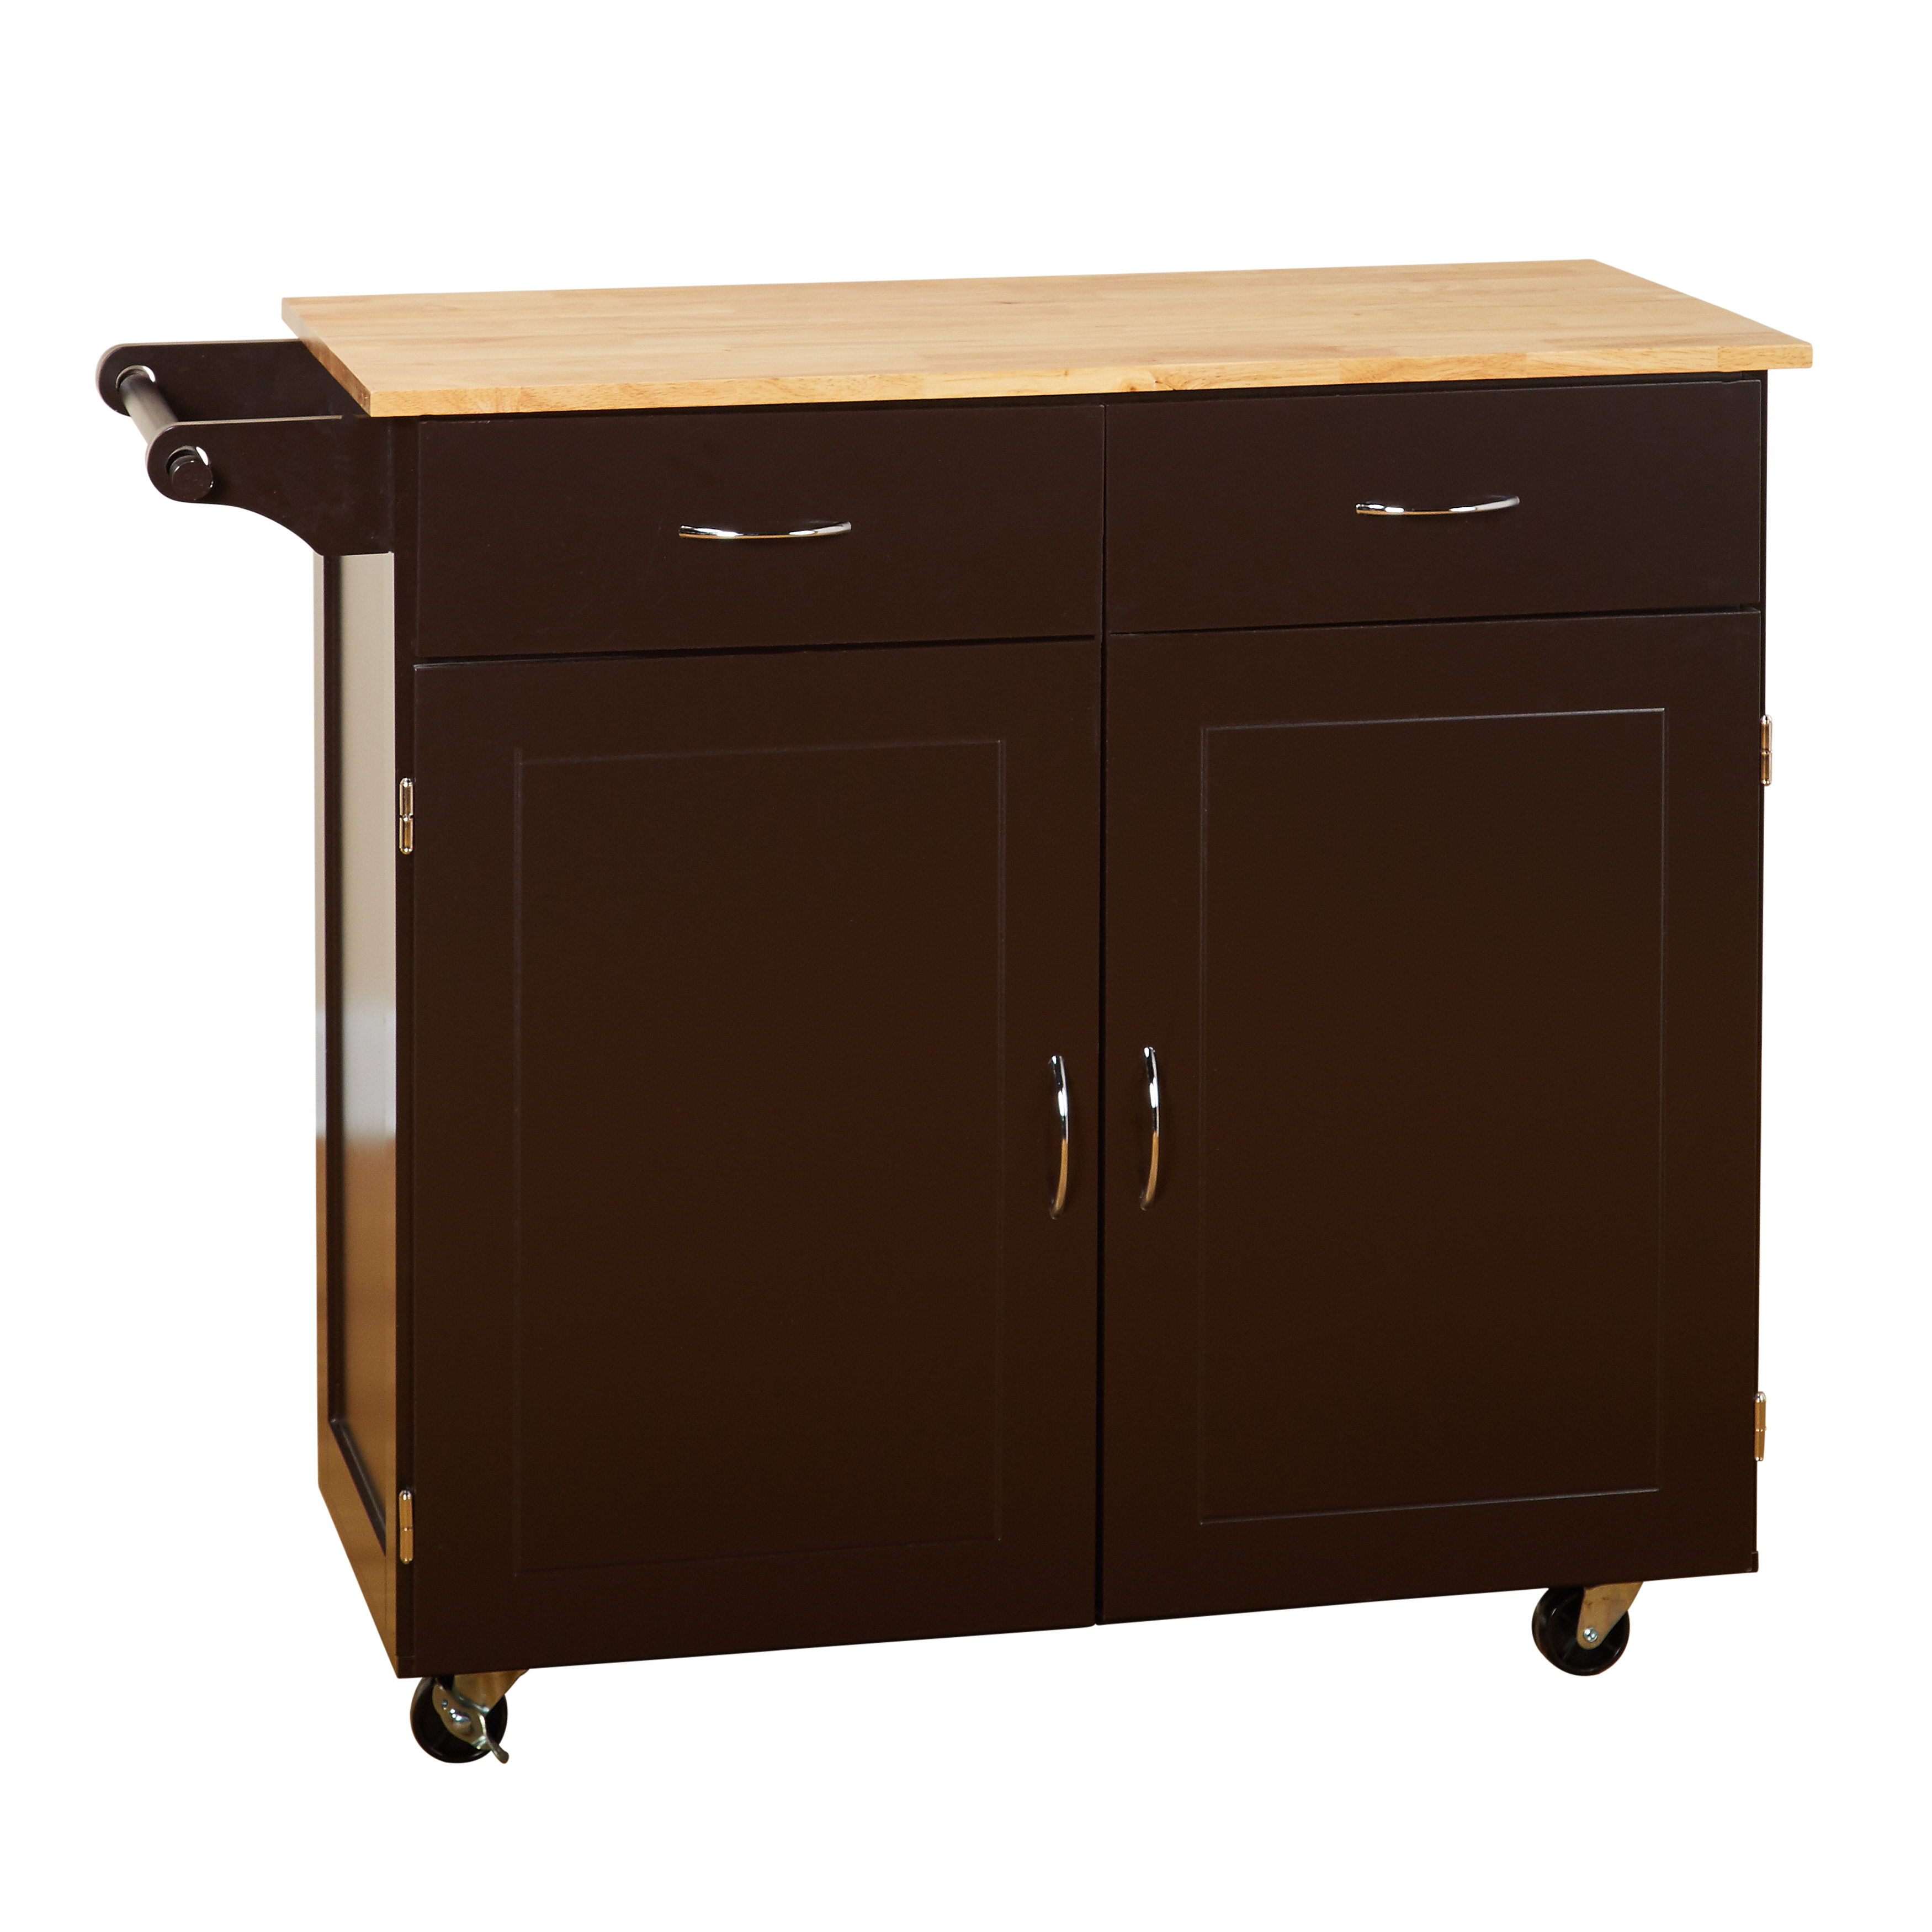 TMS Large Kitchen Cart with Rubber wood Top, Espresso - image 4 of 5